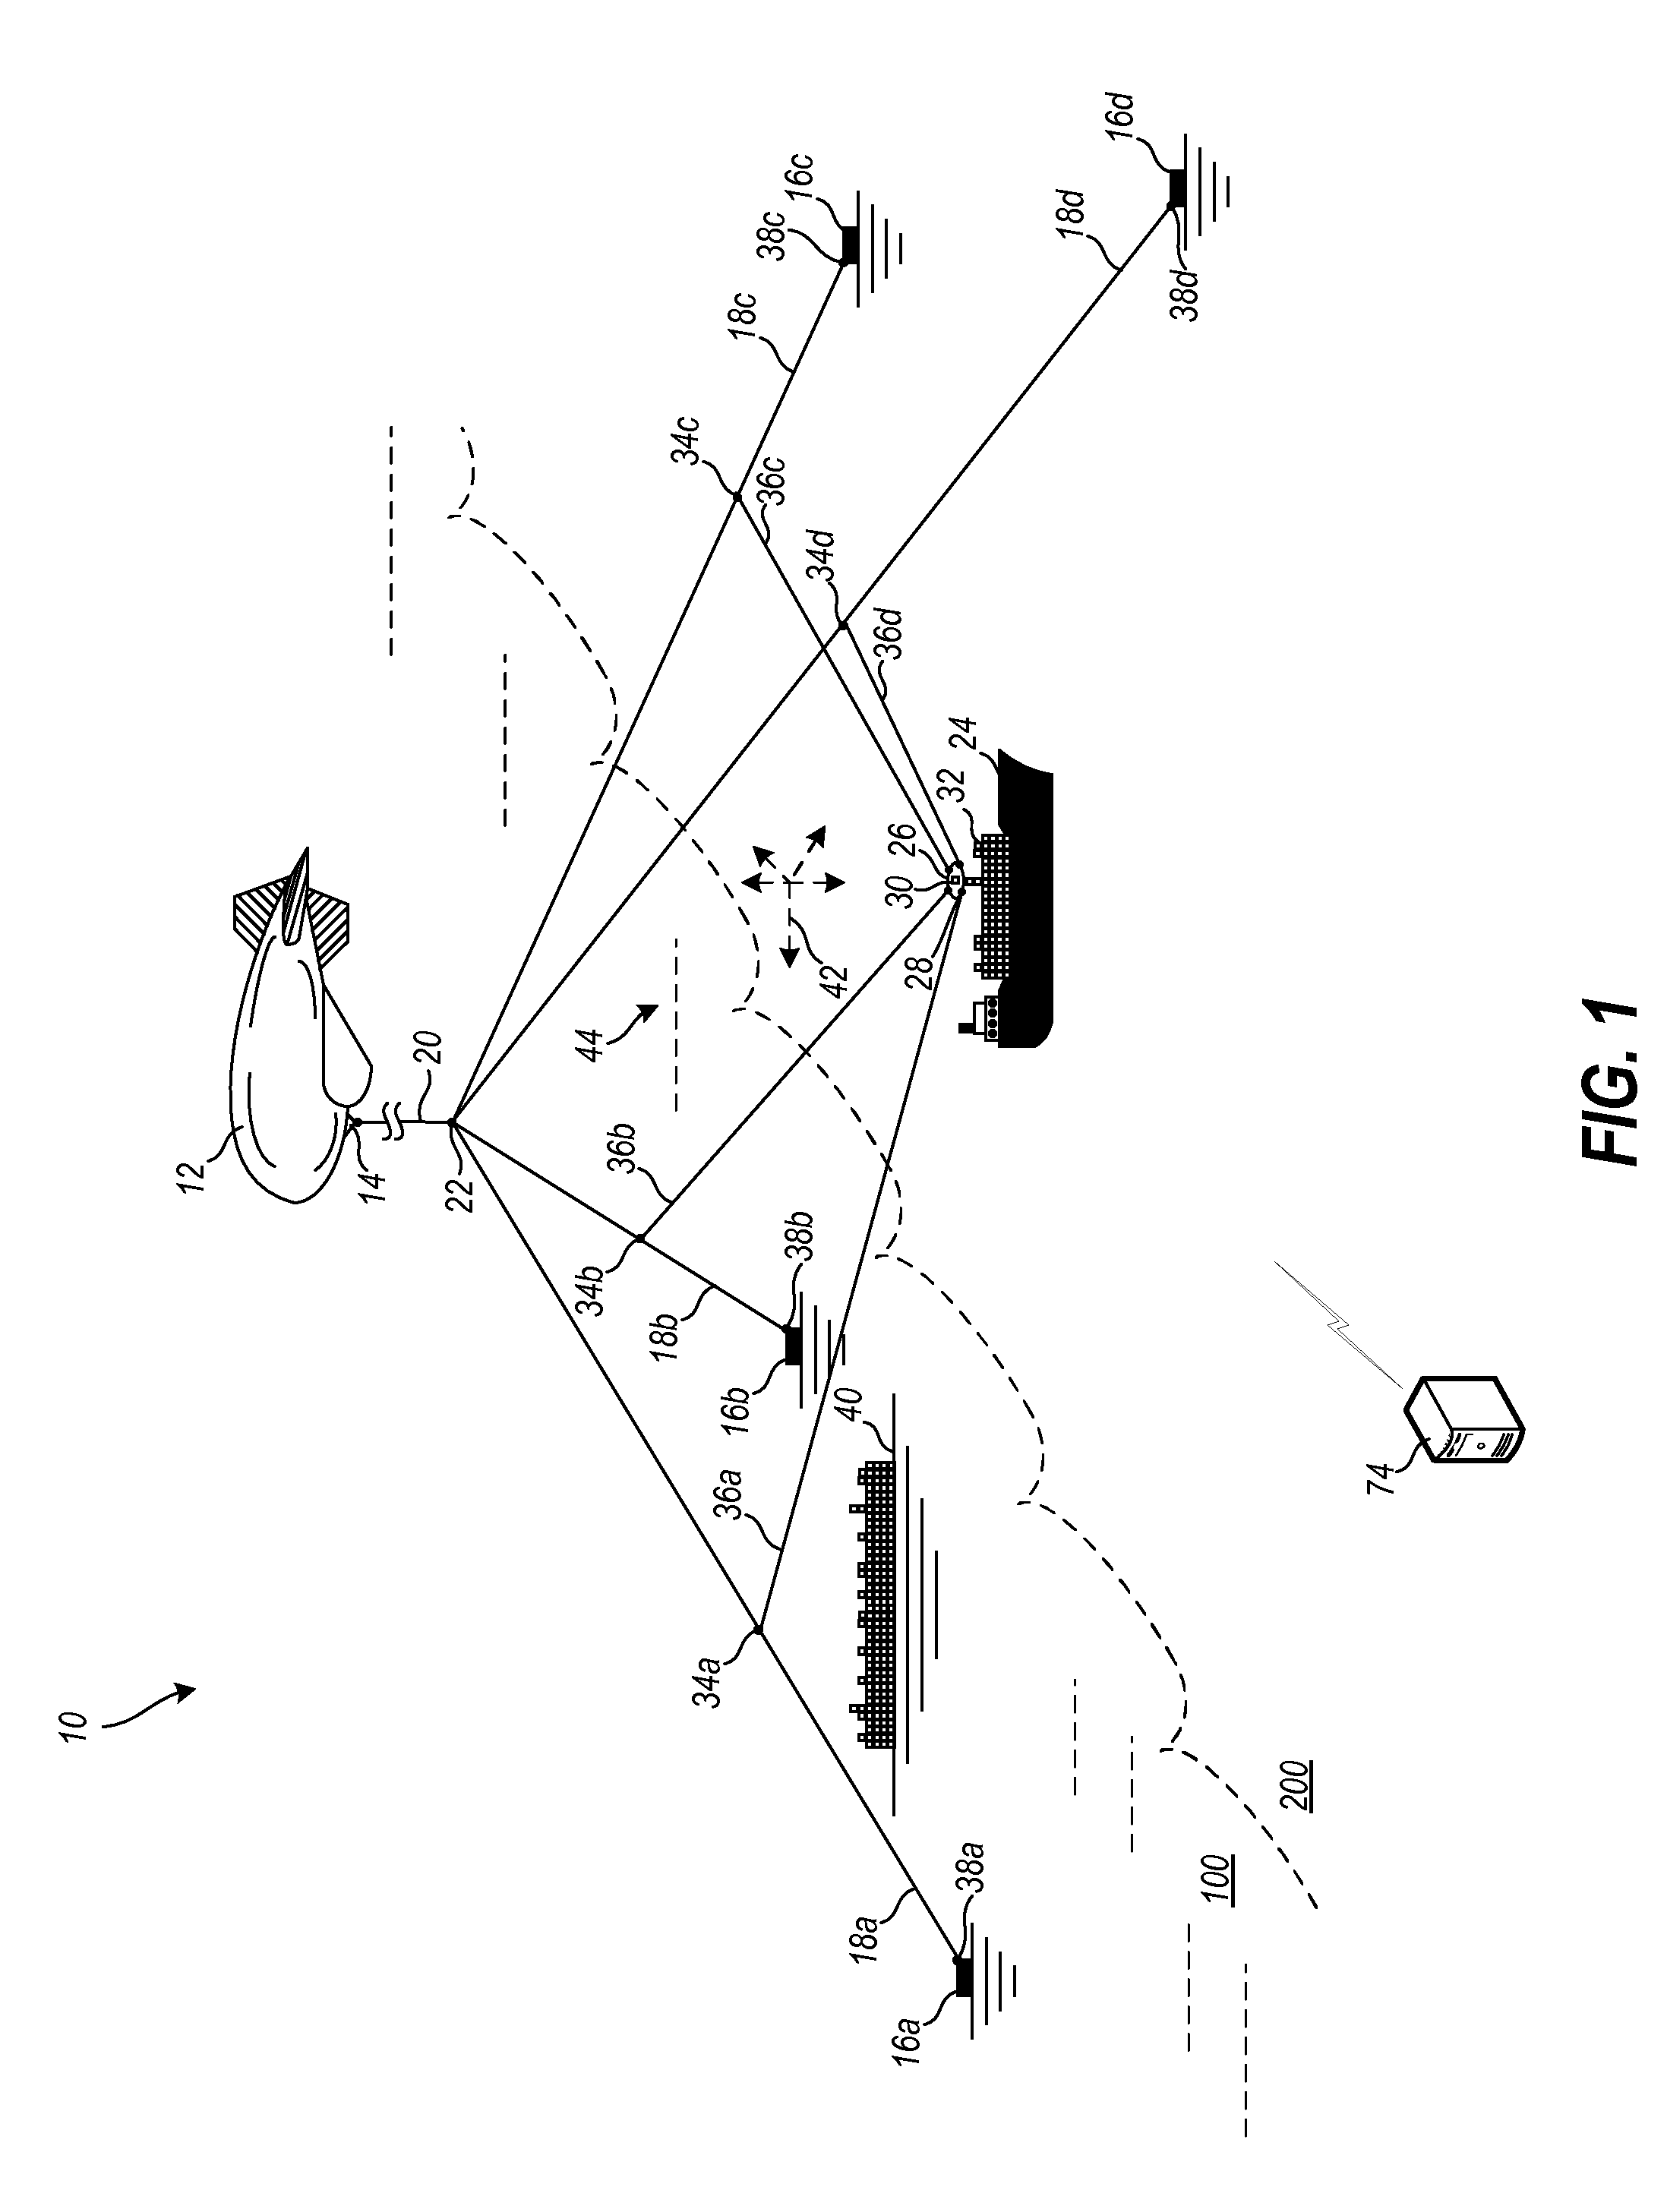 Systems and methods for aerial cabled transportation